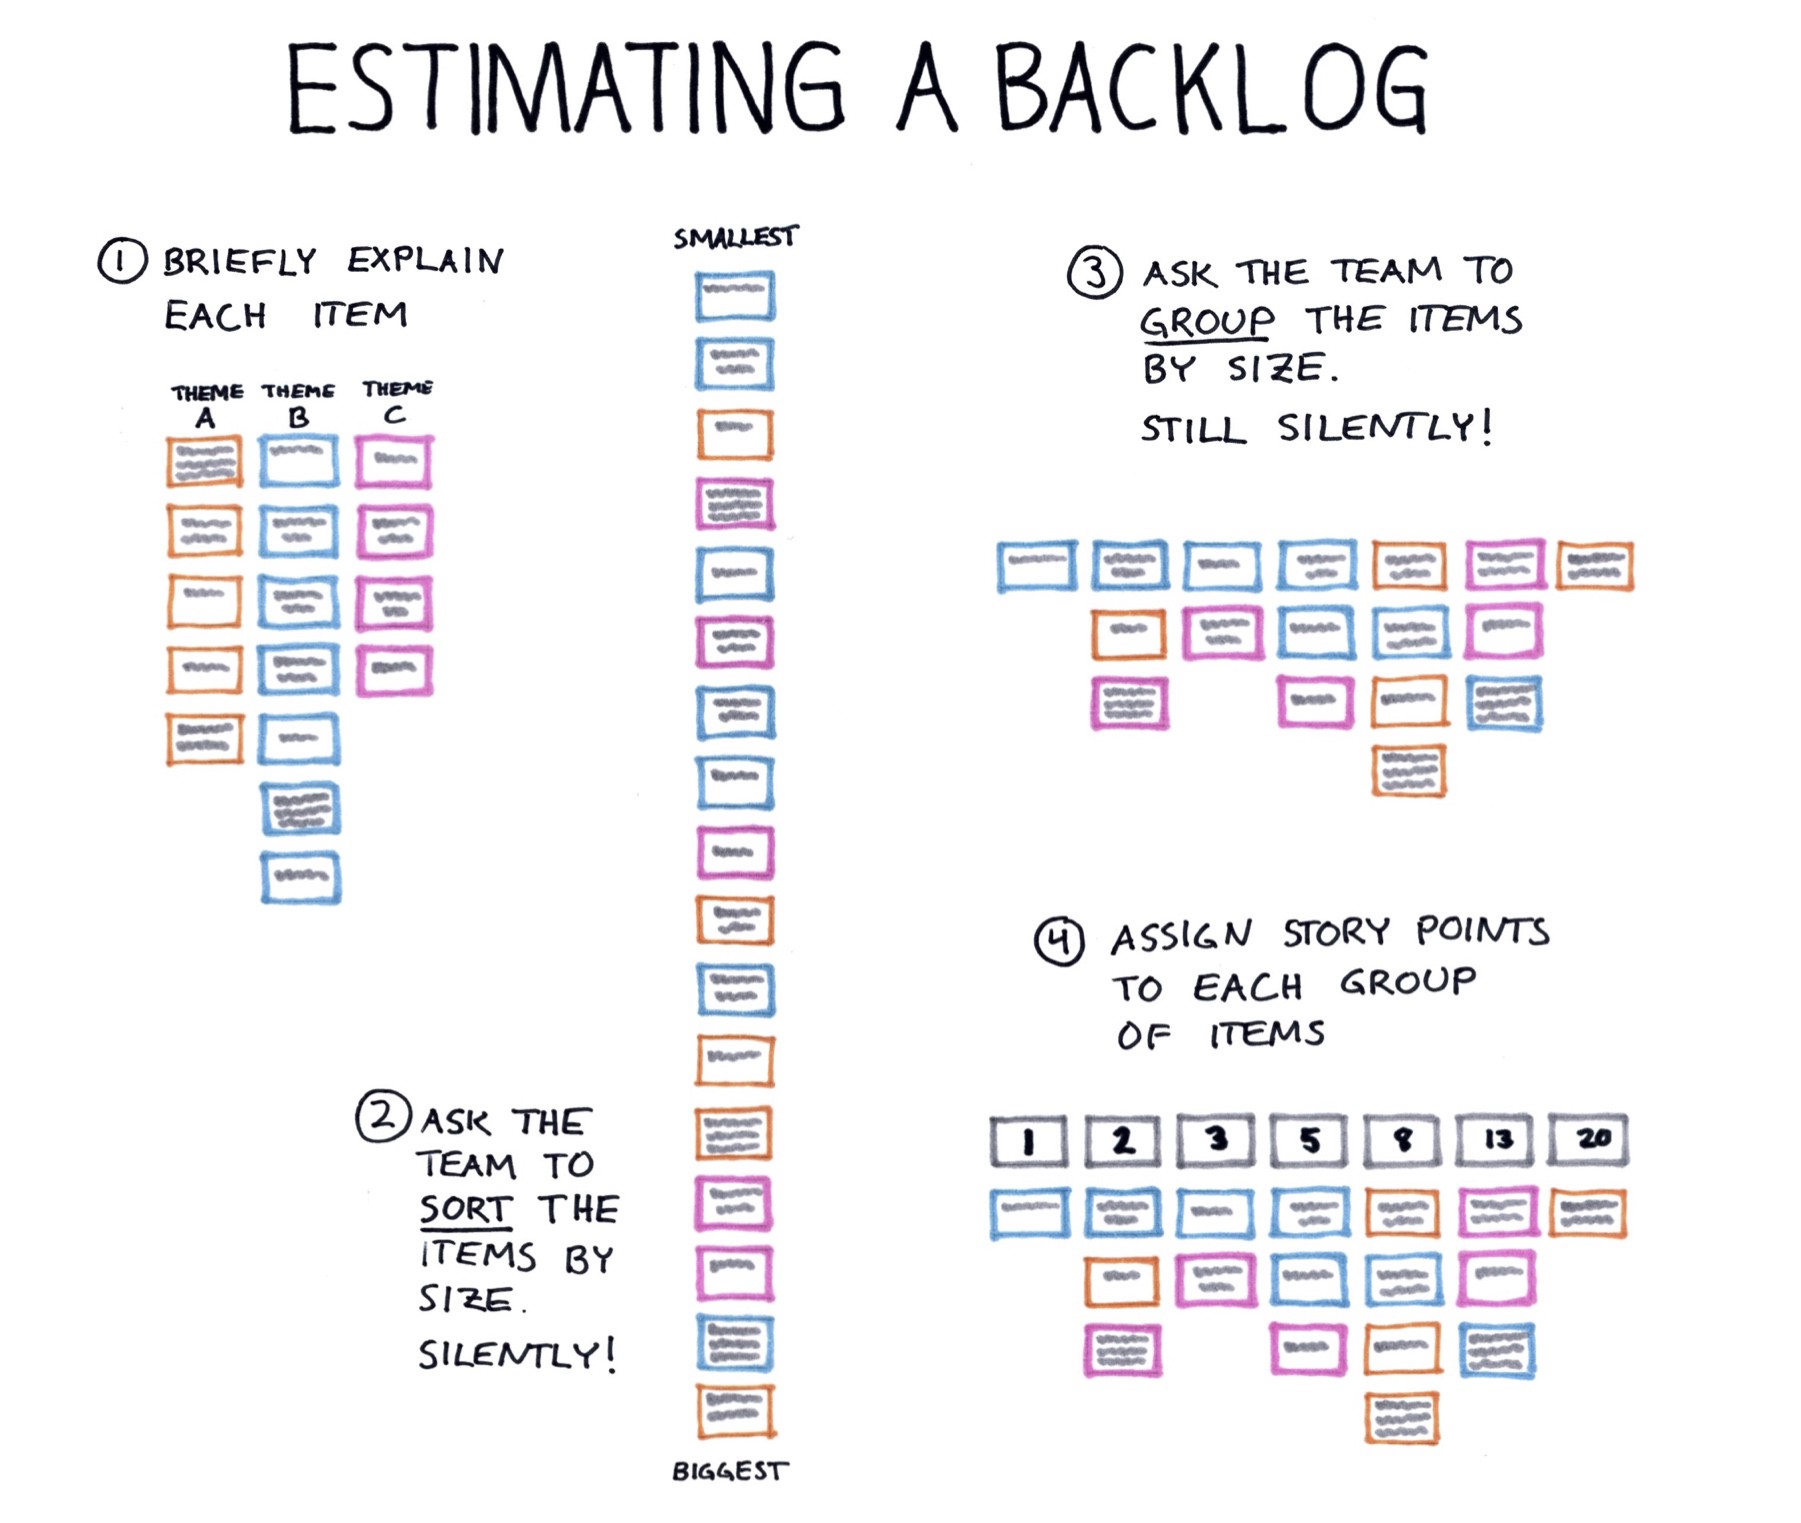 A quick way to estimate a whole product backlog